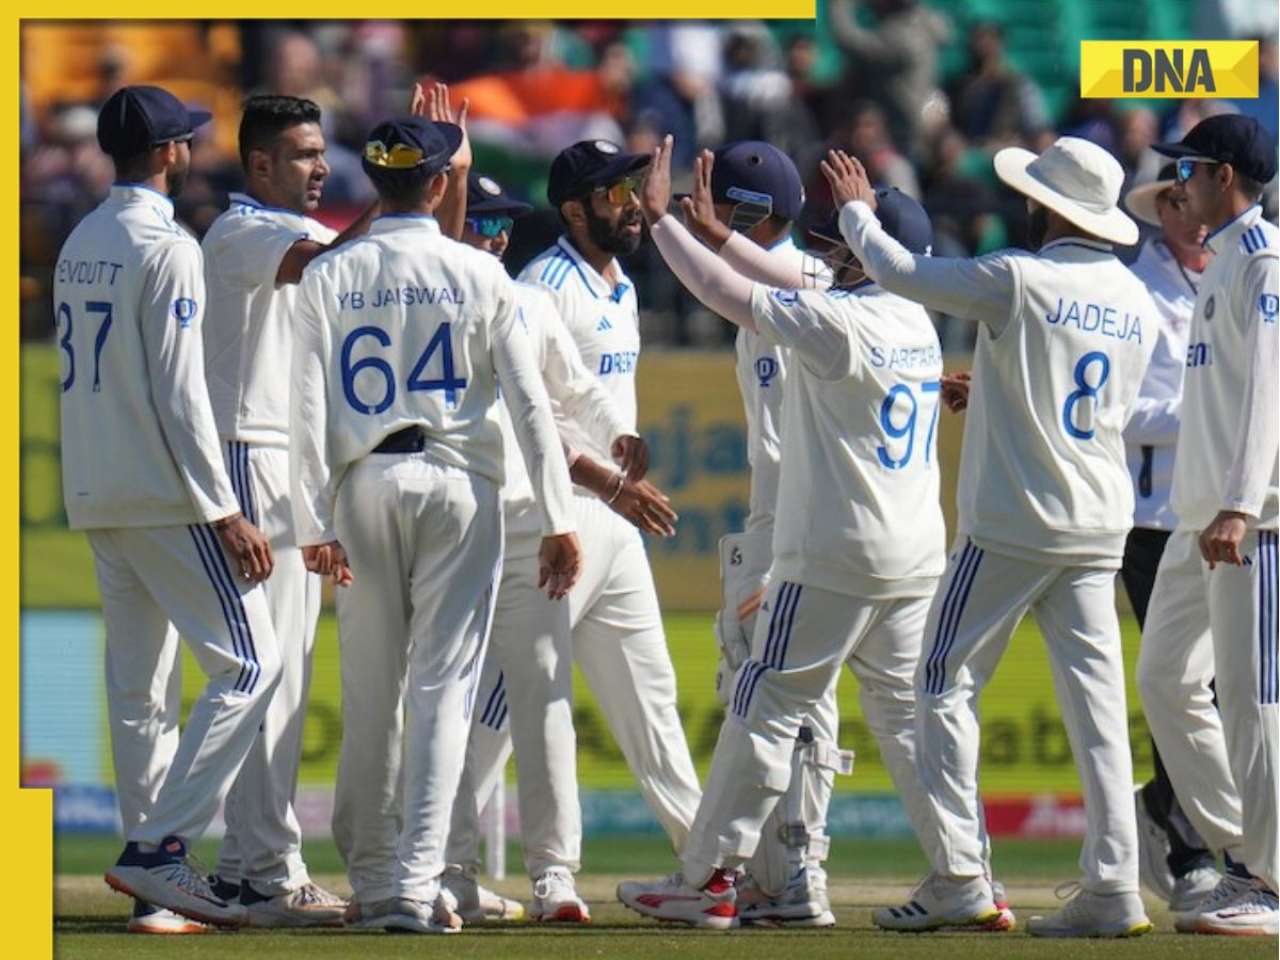 IND vs ENG 5th Test: R Ashwin shines as India beat England by an innings and 64 runs to clinch series 4-1